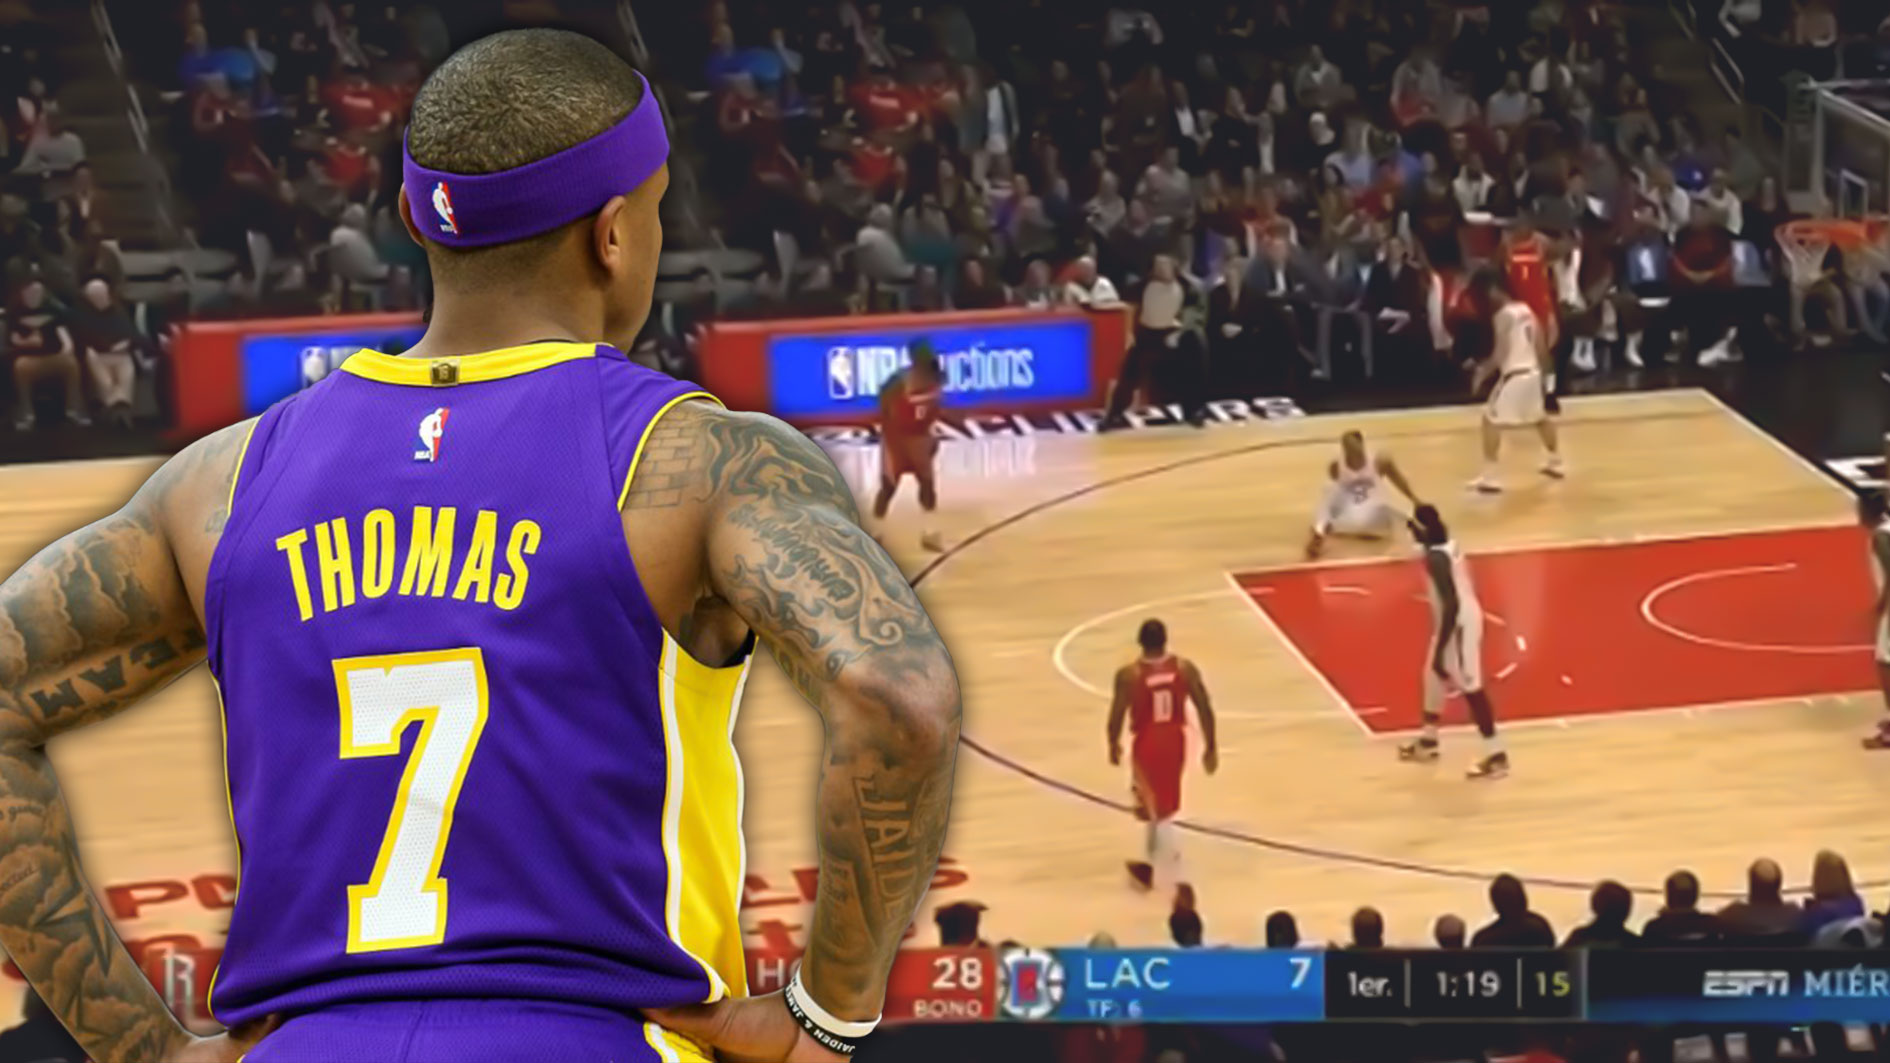 Isaiah-Thomas-the-latest-to-laud-James-Harden_s-step-back-_He-sat-him-down_